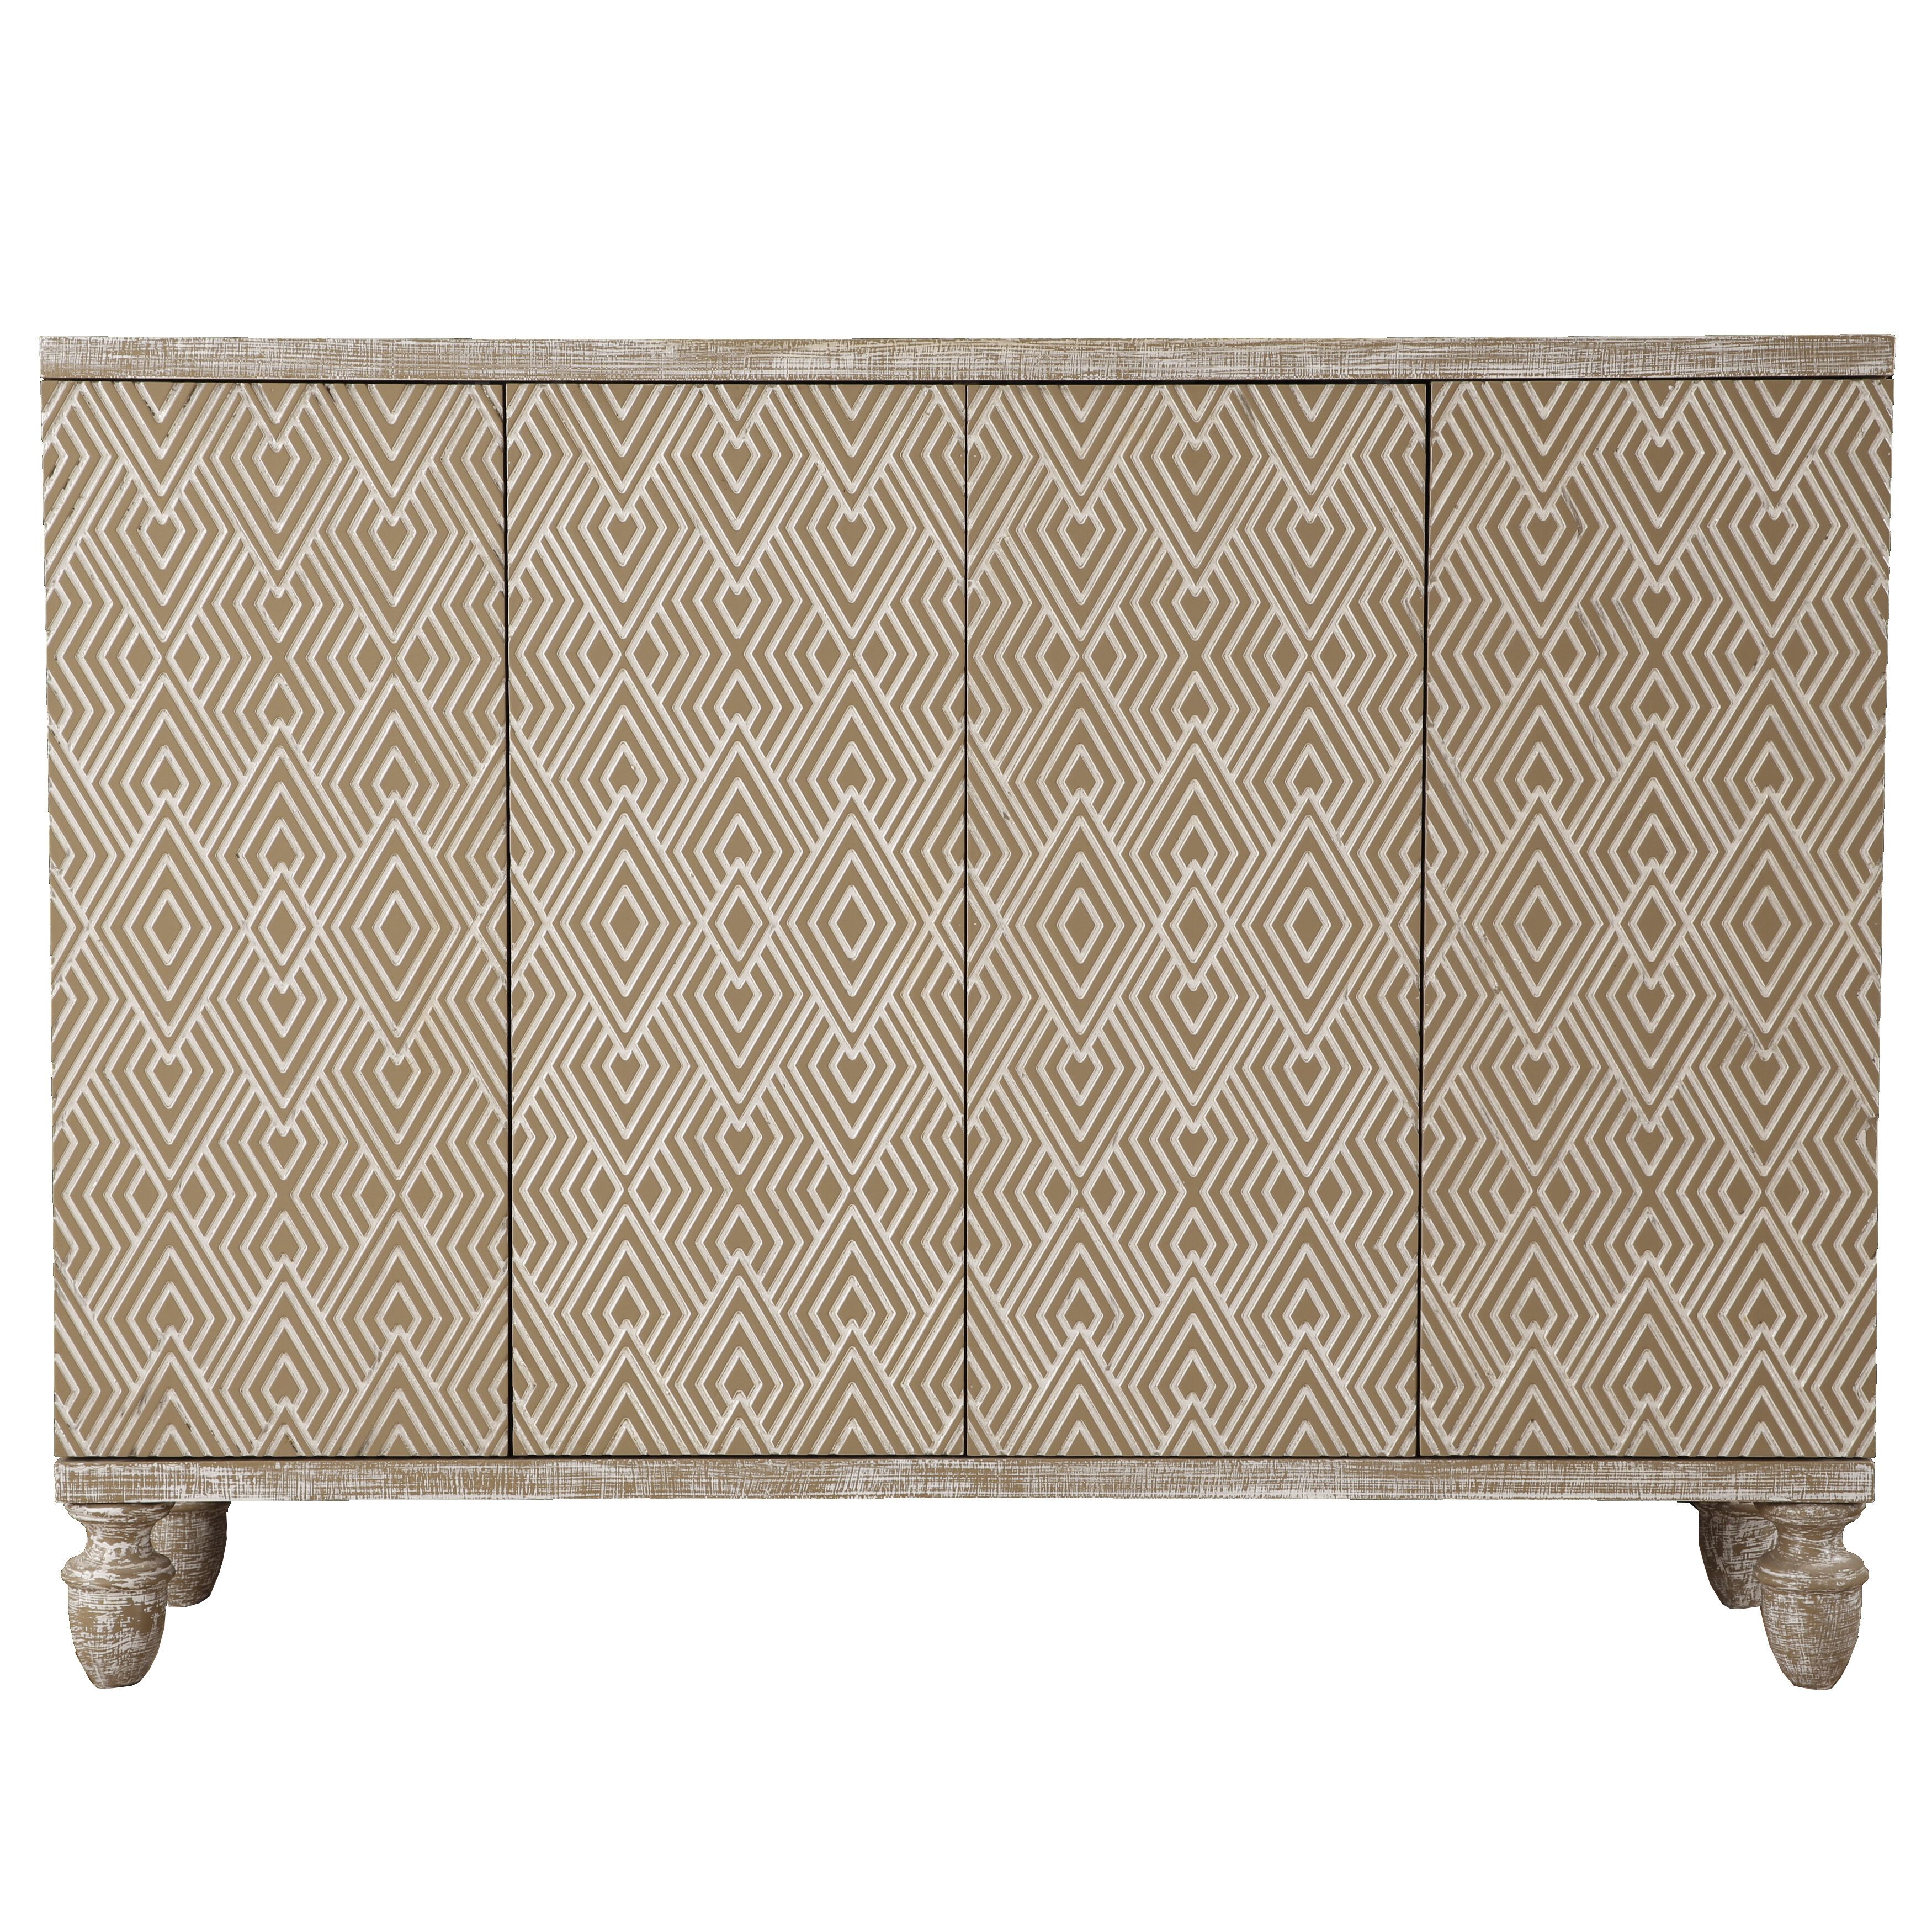 Snyder Modern Heavily Credenza Intended For Errol Media Credenzas (View 13 of 30)